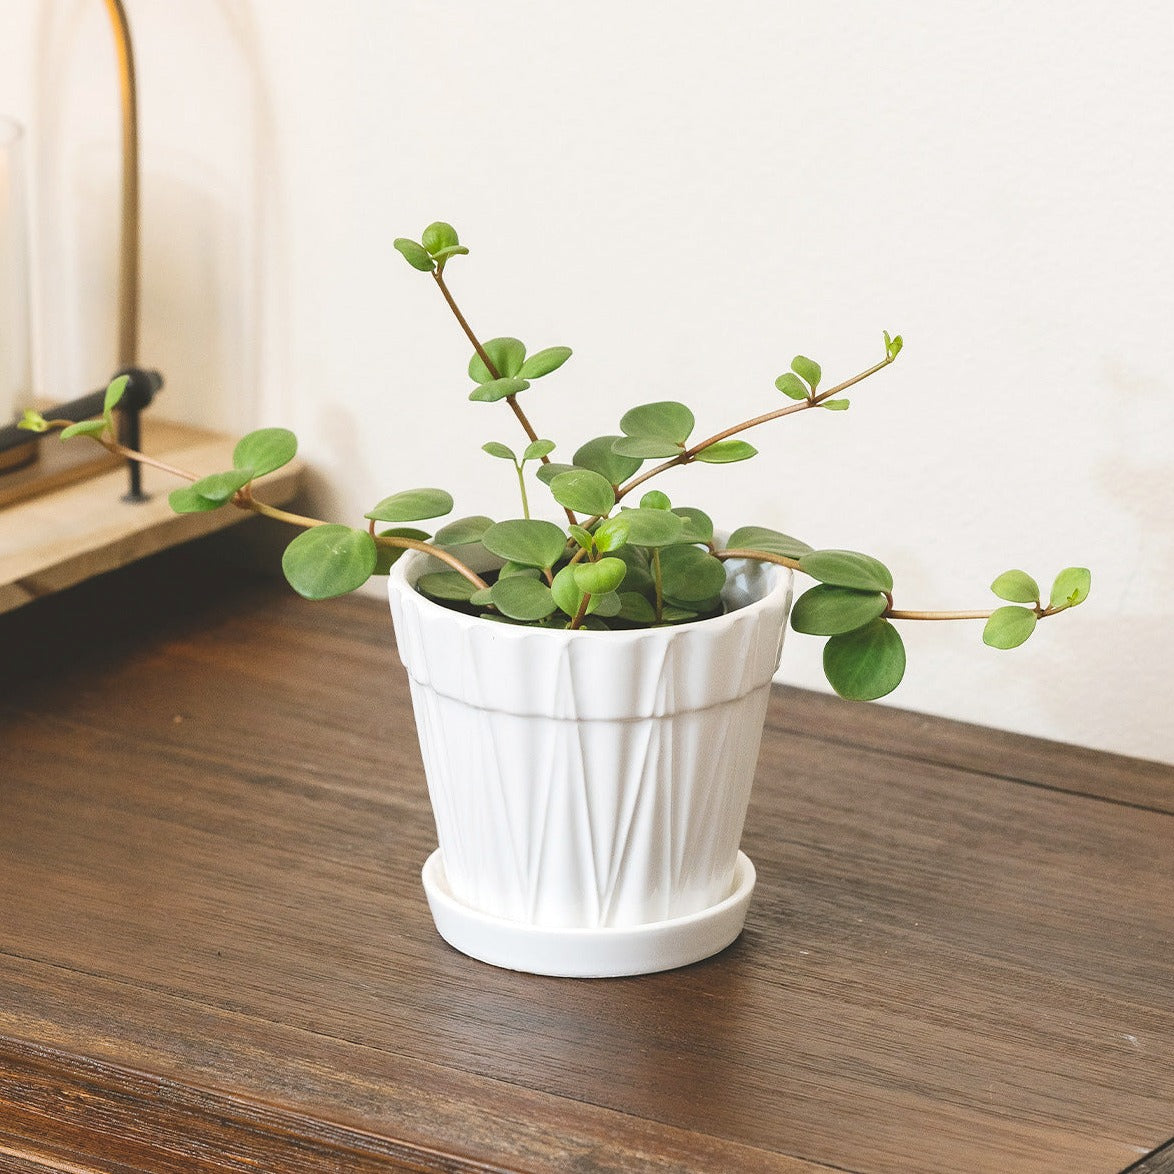 4 inch Peperomia Hope in white decorative pot for sale online, Live indoor plant decor ideas